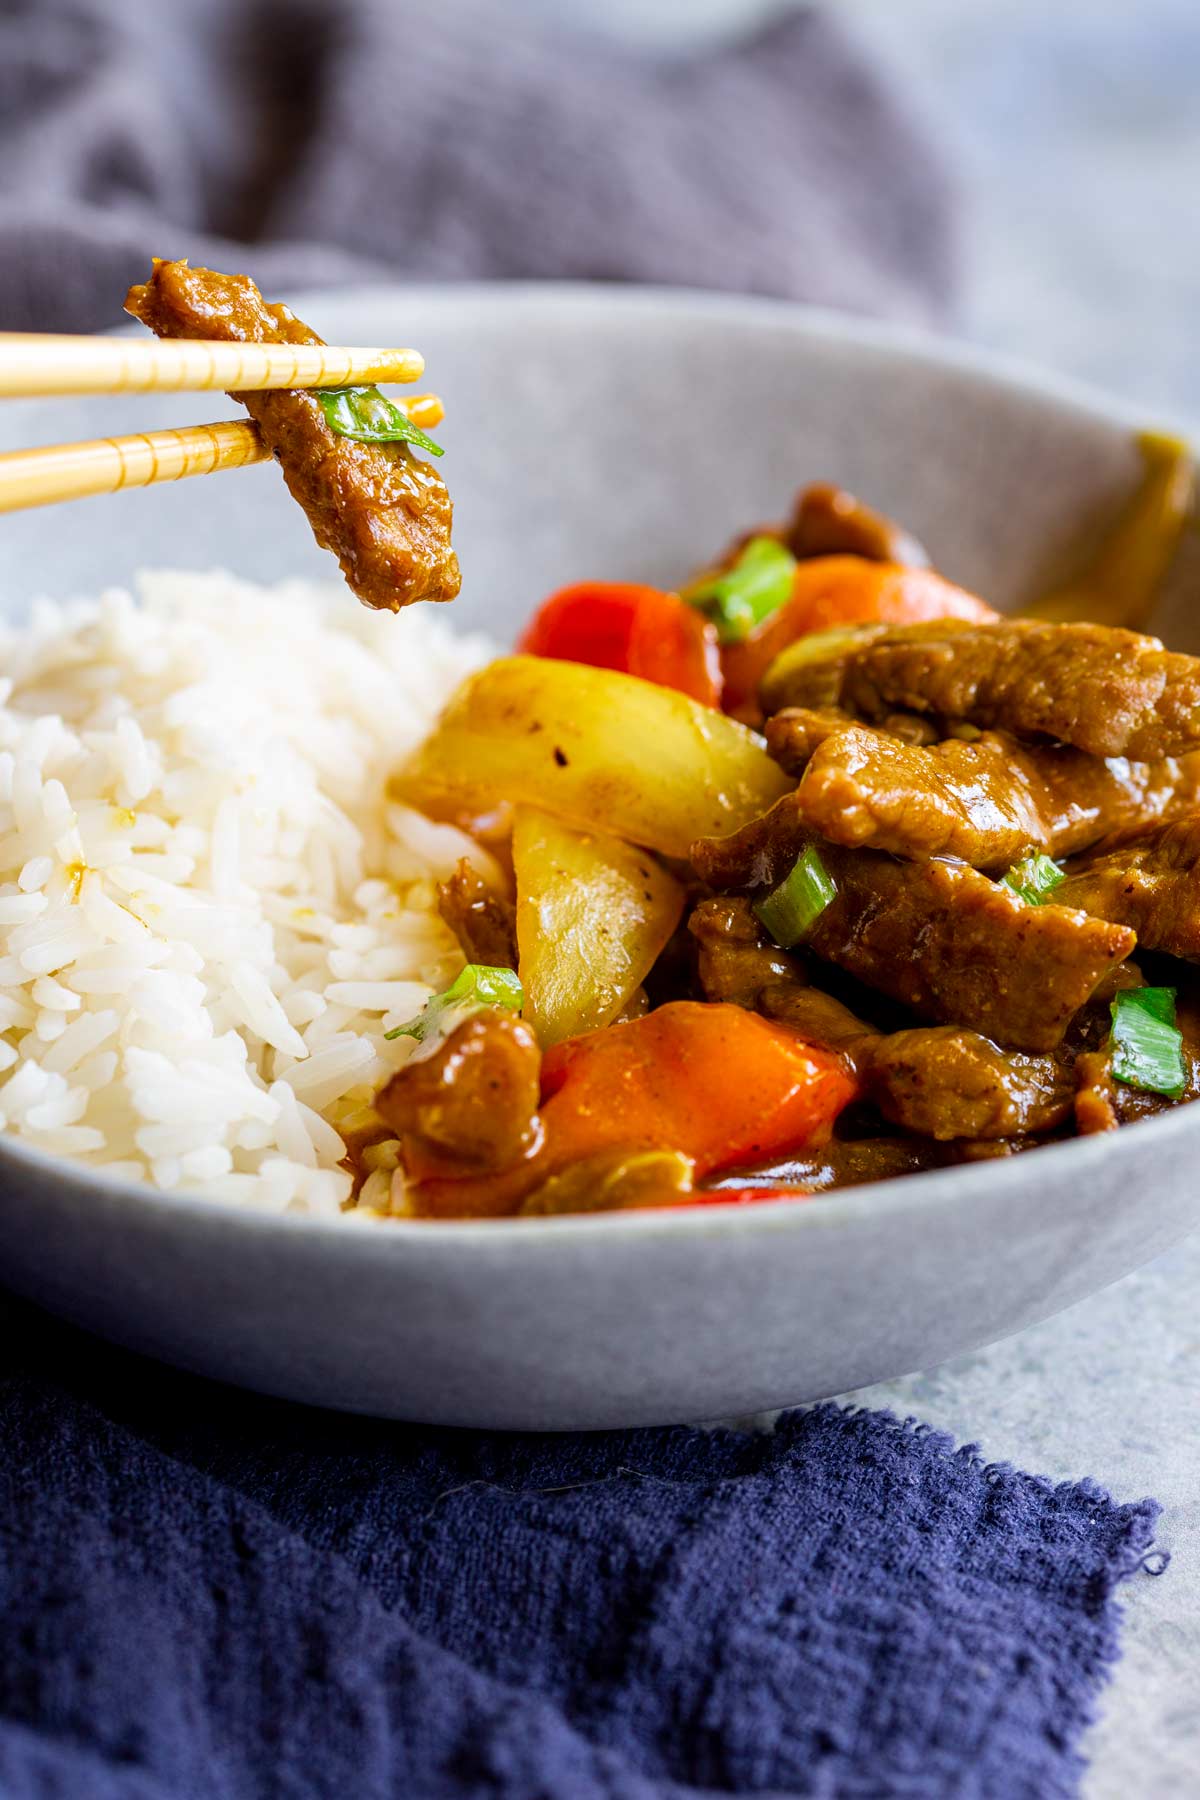 chopsticks holding a piece of beef over a bowl of beef in sauce with veg and rice